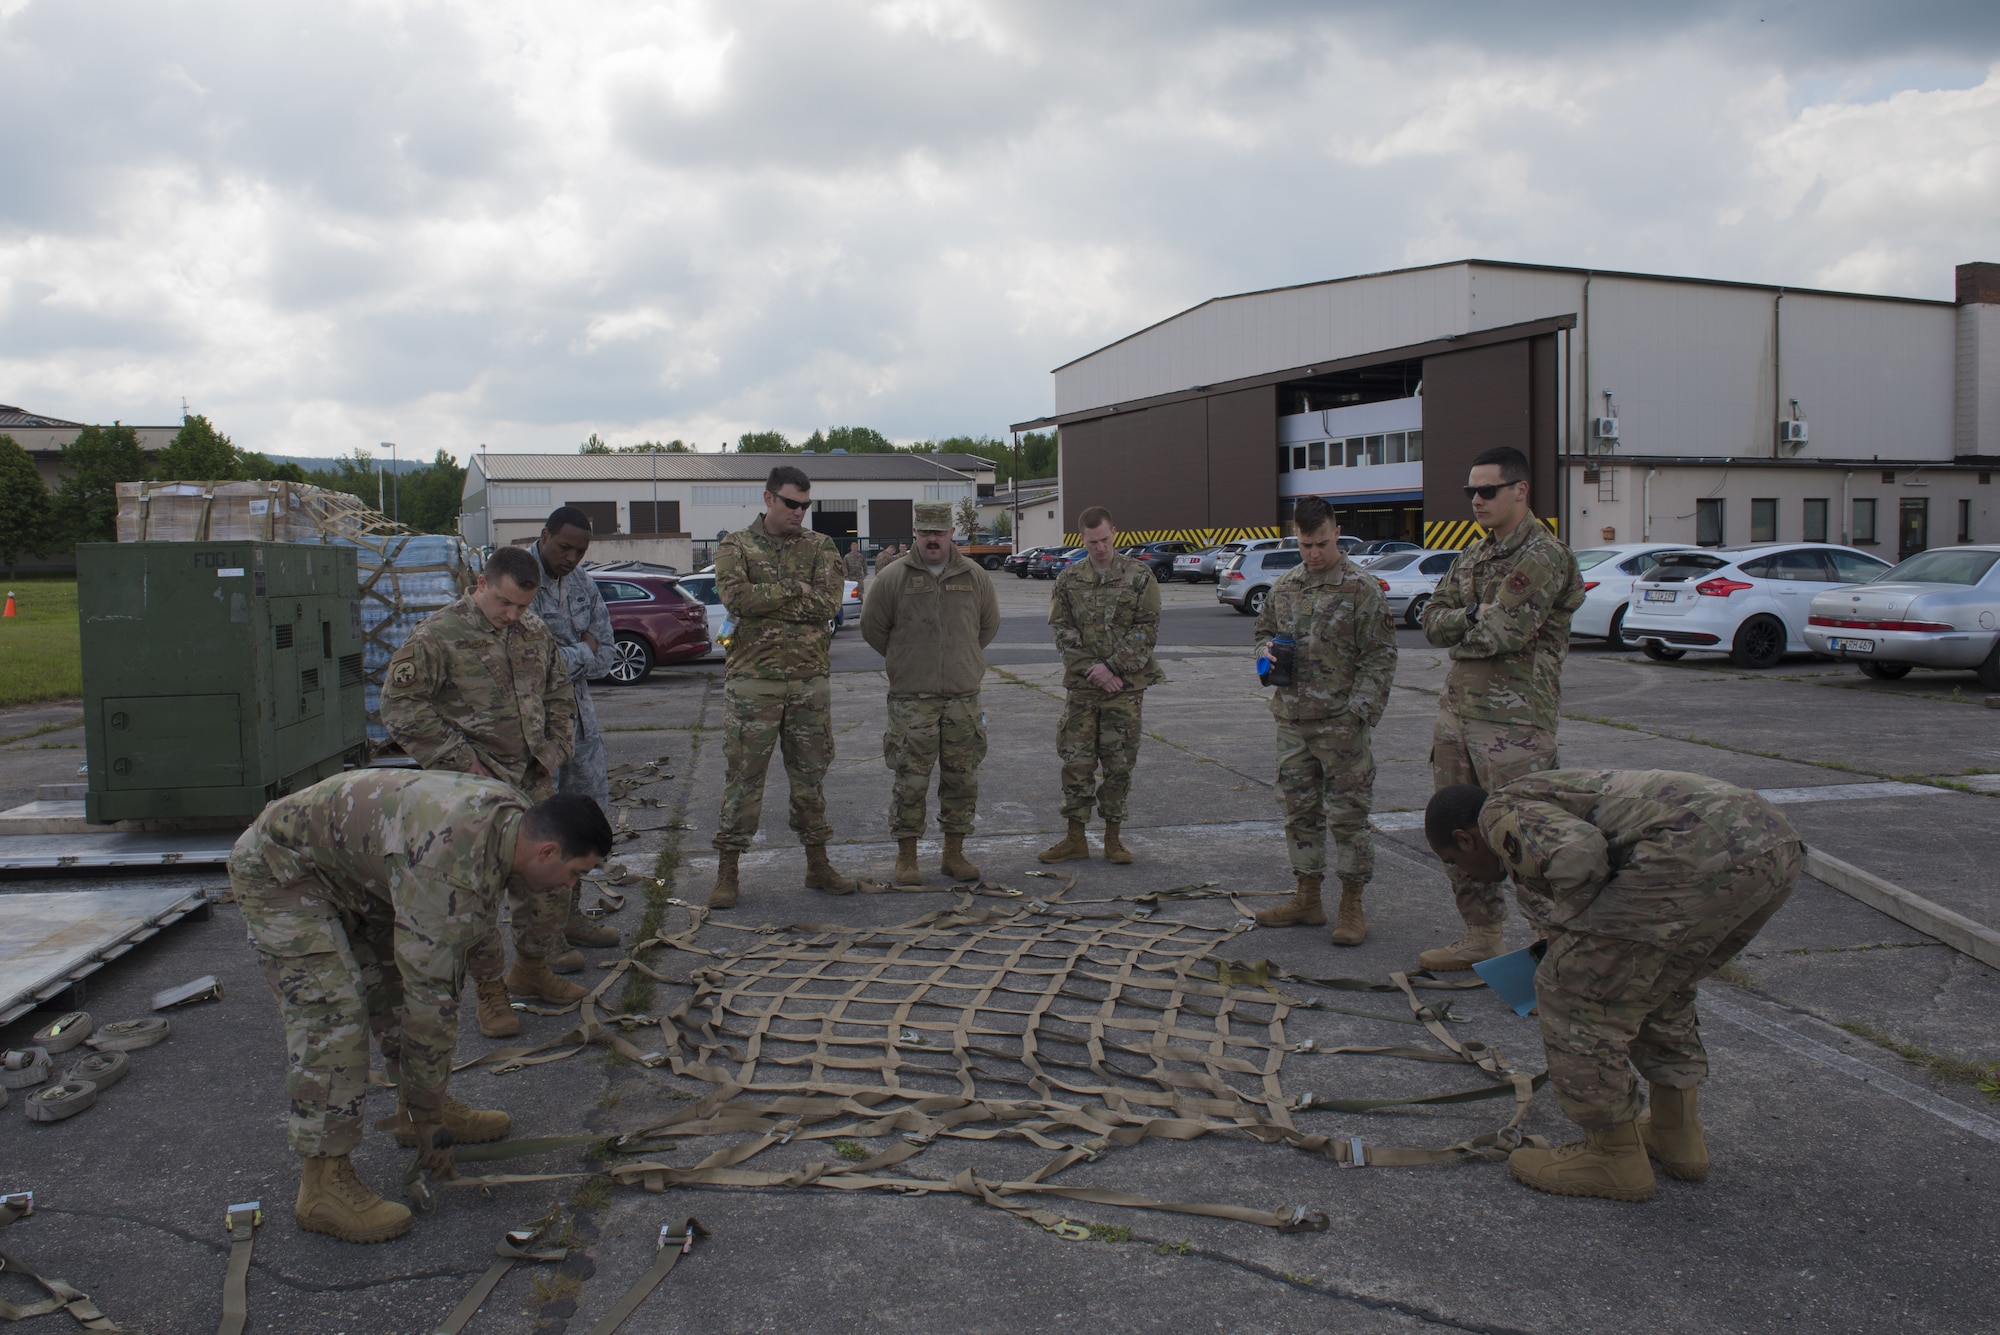 Students participating in the Landing Zone Safety Officers course learn how to properly secure a pallet on Ramstein Air Base, Germany, May 23, 2019. This allows them to further their skills and be used in other career fields. (U.S. Air Force Photo by Airman 1st Class Kaylea Berry)